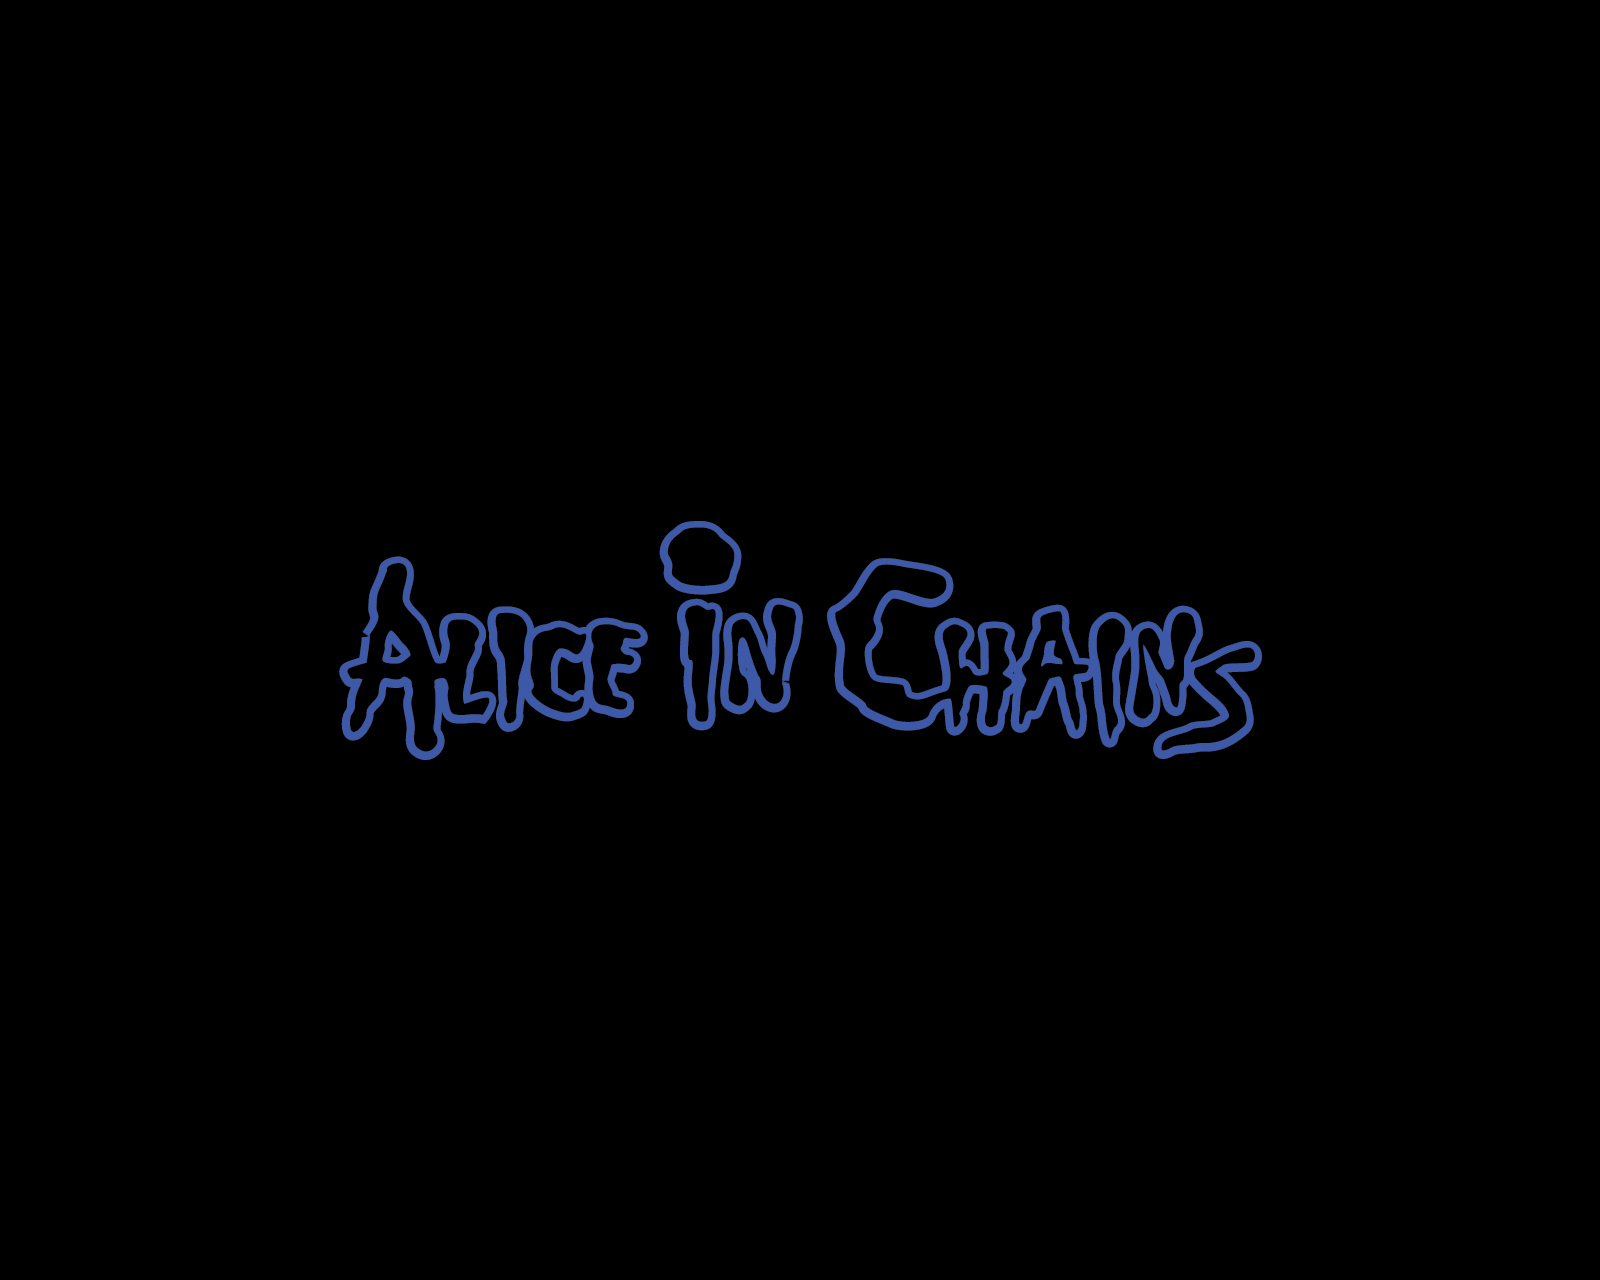 Alice In Chains Logo And Wallpaper Band Logos Rock